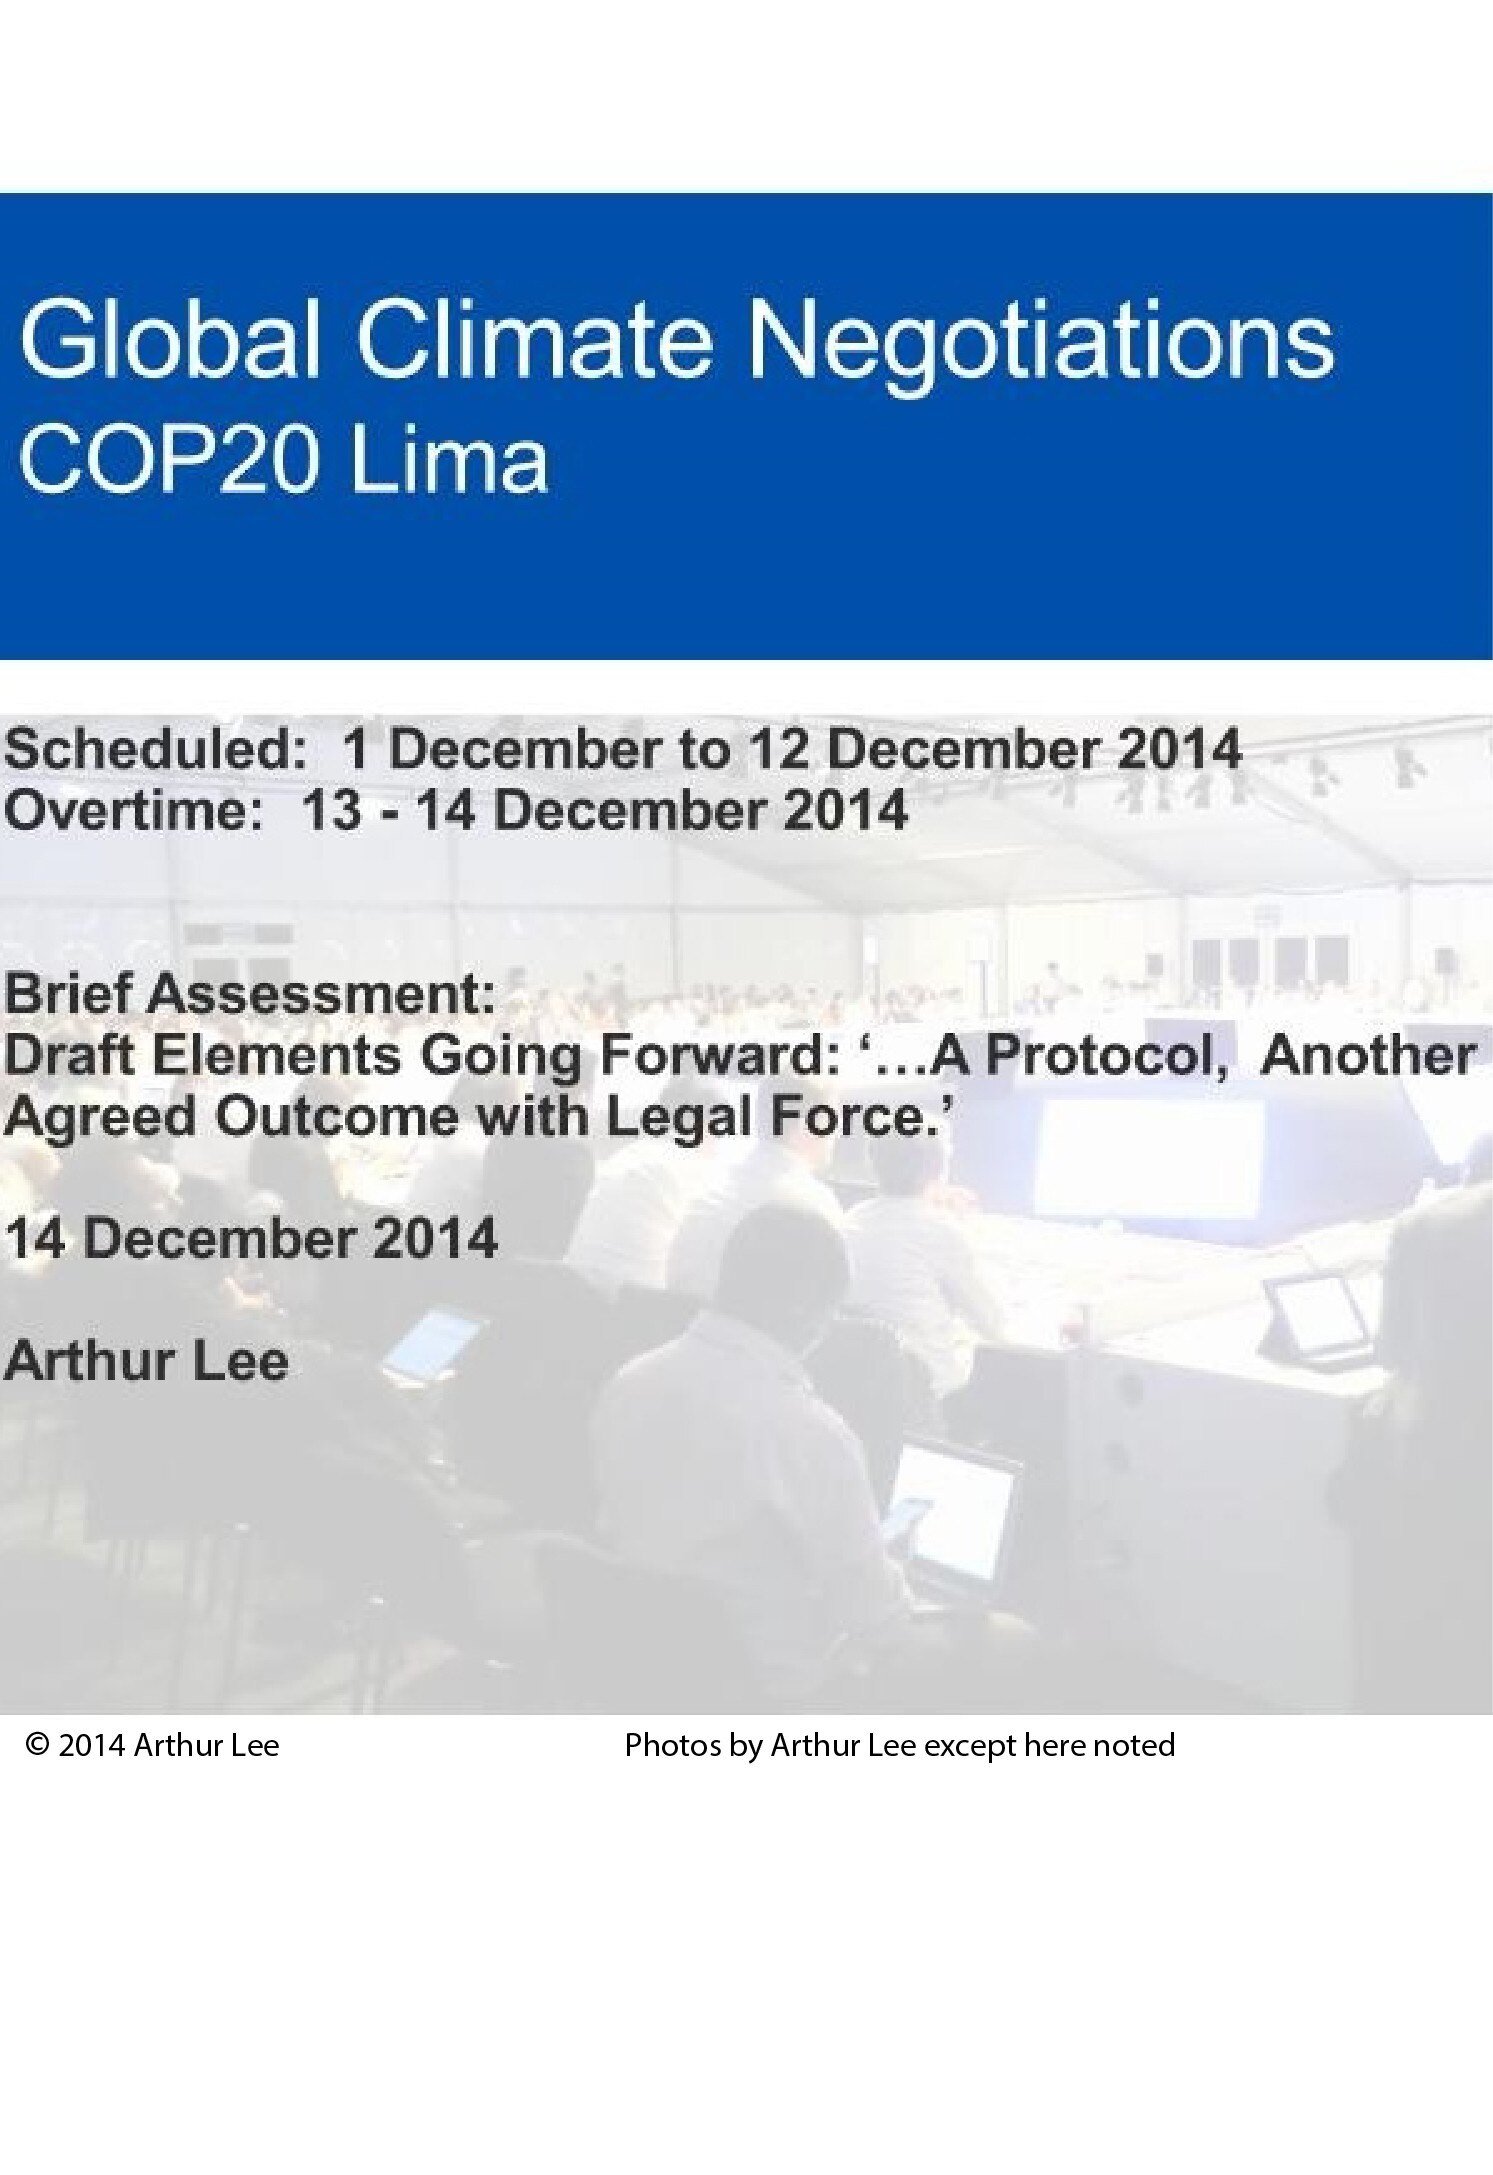 Global Climate Negotiations COP20 Lima